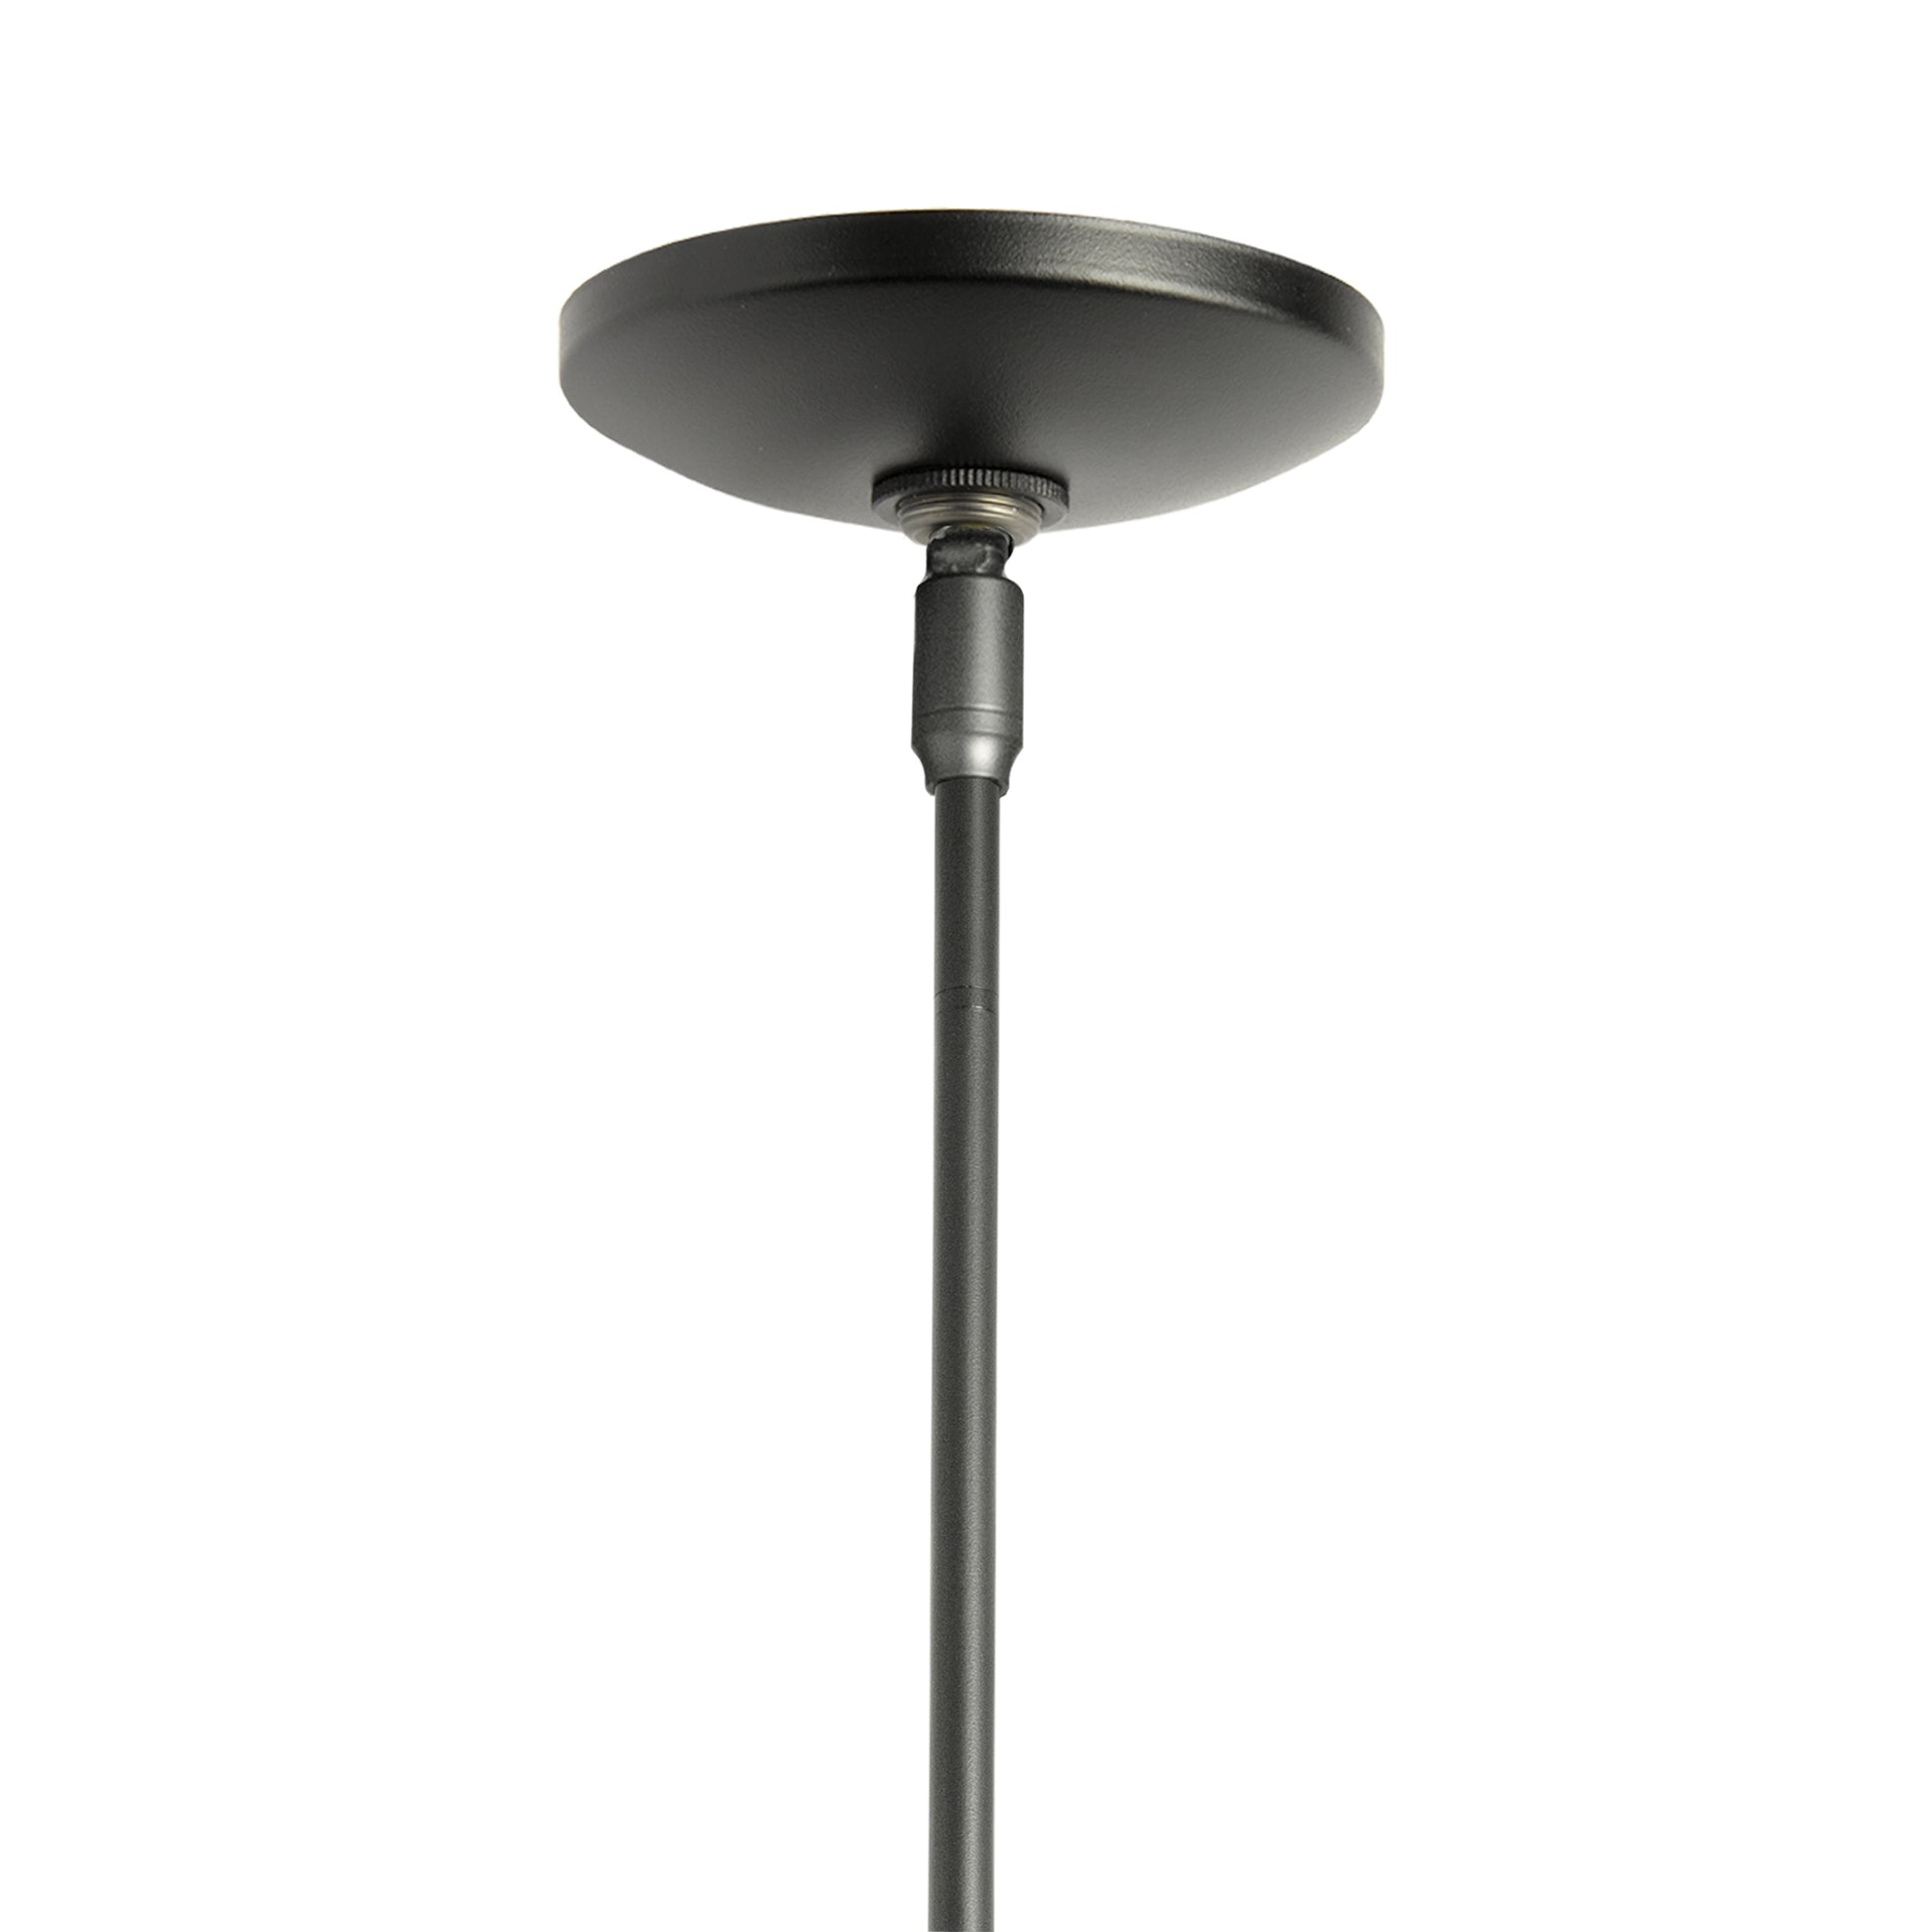 An Industrial lighting pendant light, the Apparatus Mini Pendant by Hubbardton Forge, on a white background.